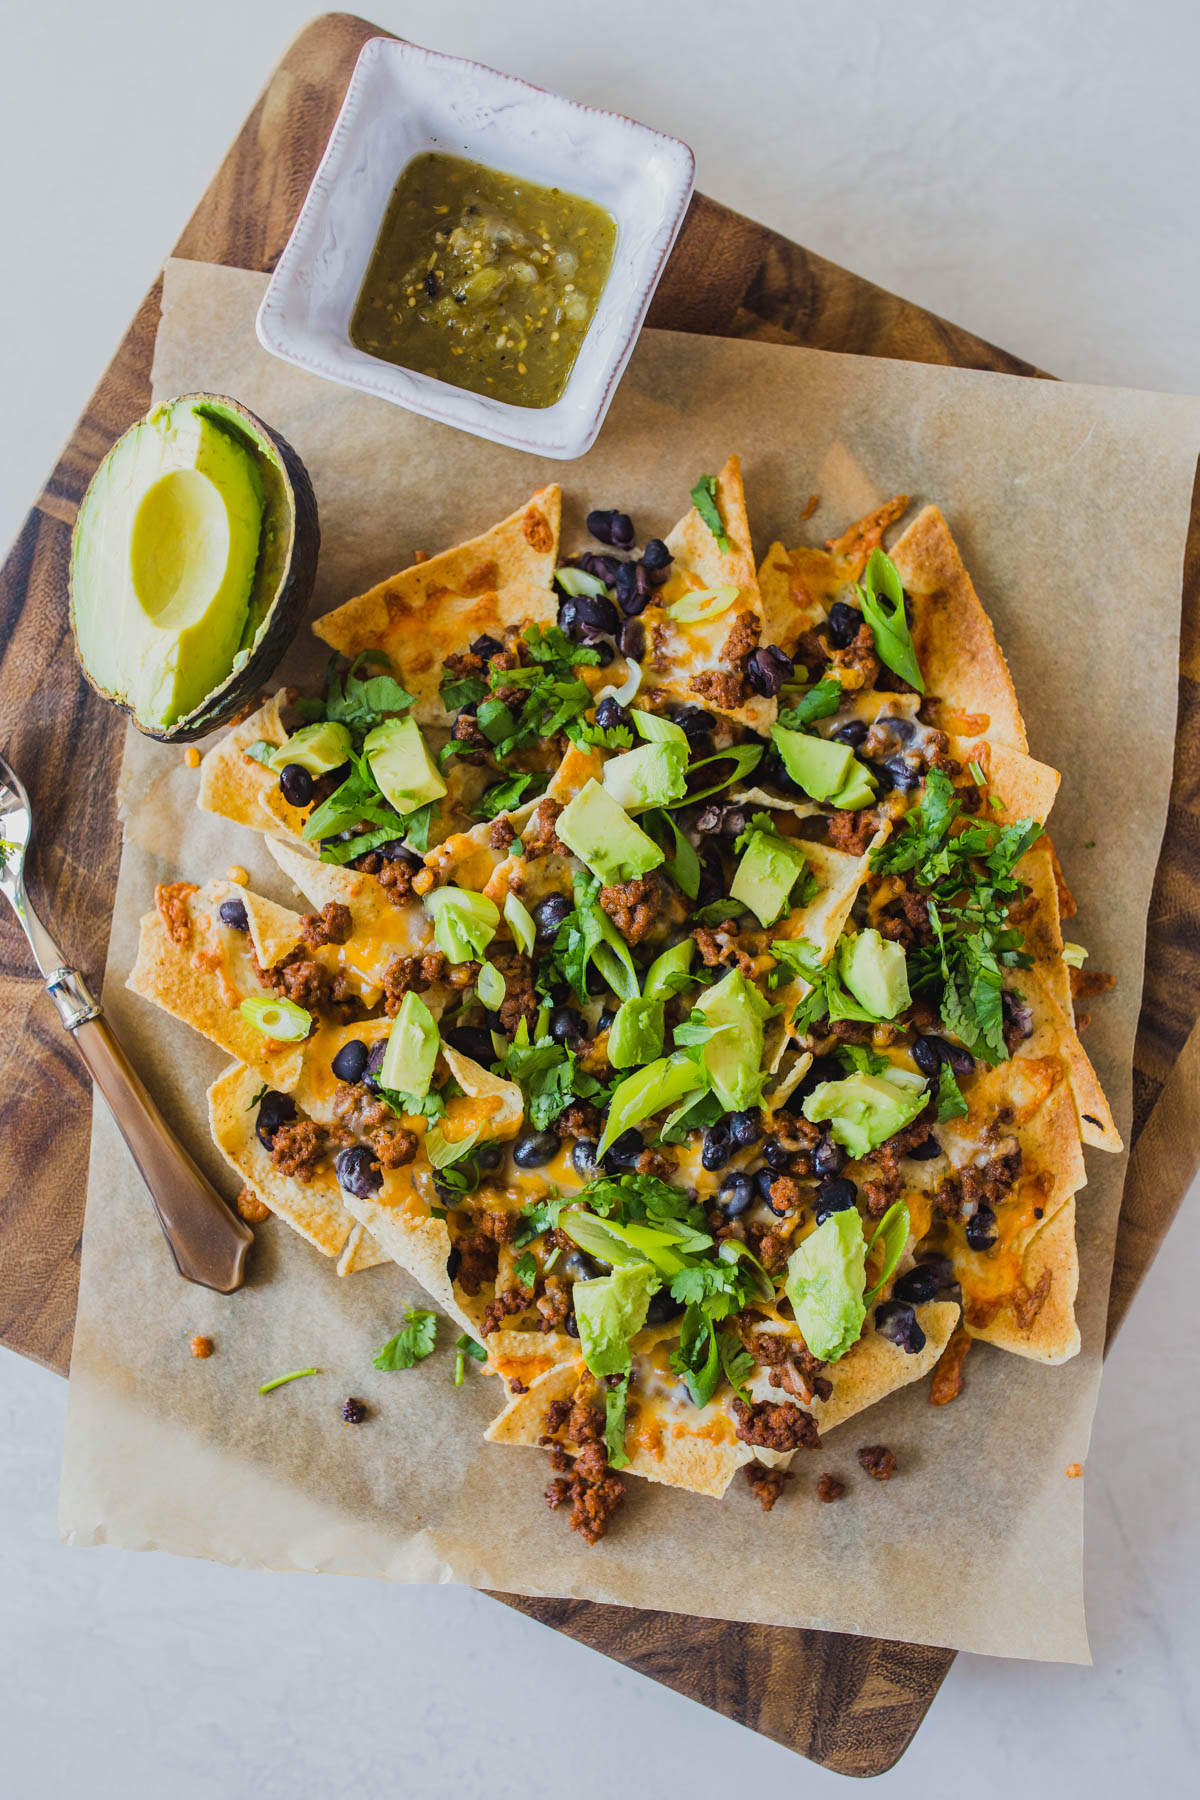 Looking for easy grain free dinners? These sheet pan beef nachos are so simple and so delicious! You only need a few ingredients like grassfed ground beef, black beans, Siete tortilla chips, avocado, cilantro and grated cheese for this easy grain free dinner. Click through for how to make these clean eating healthy nachos. #healthynachos #cleaneating #grainfree #grassfedbeef